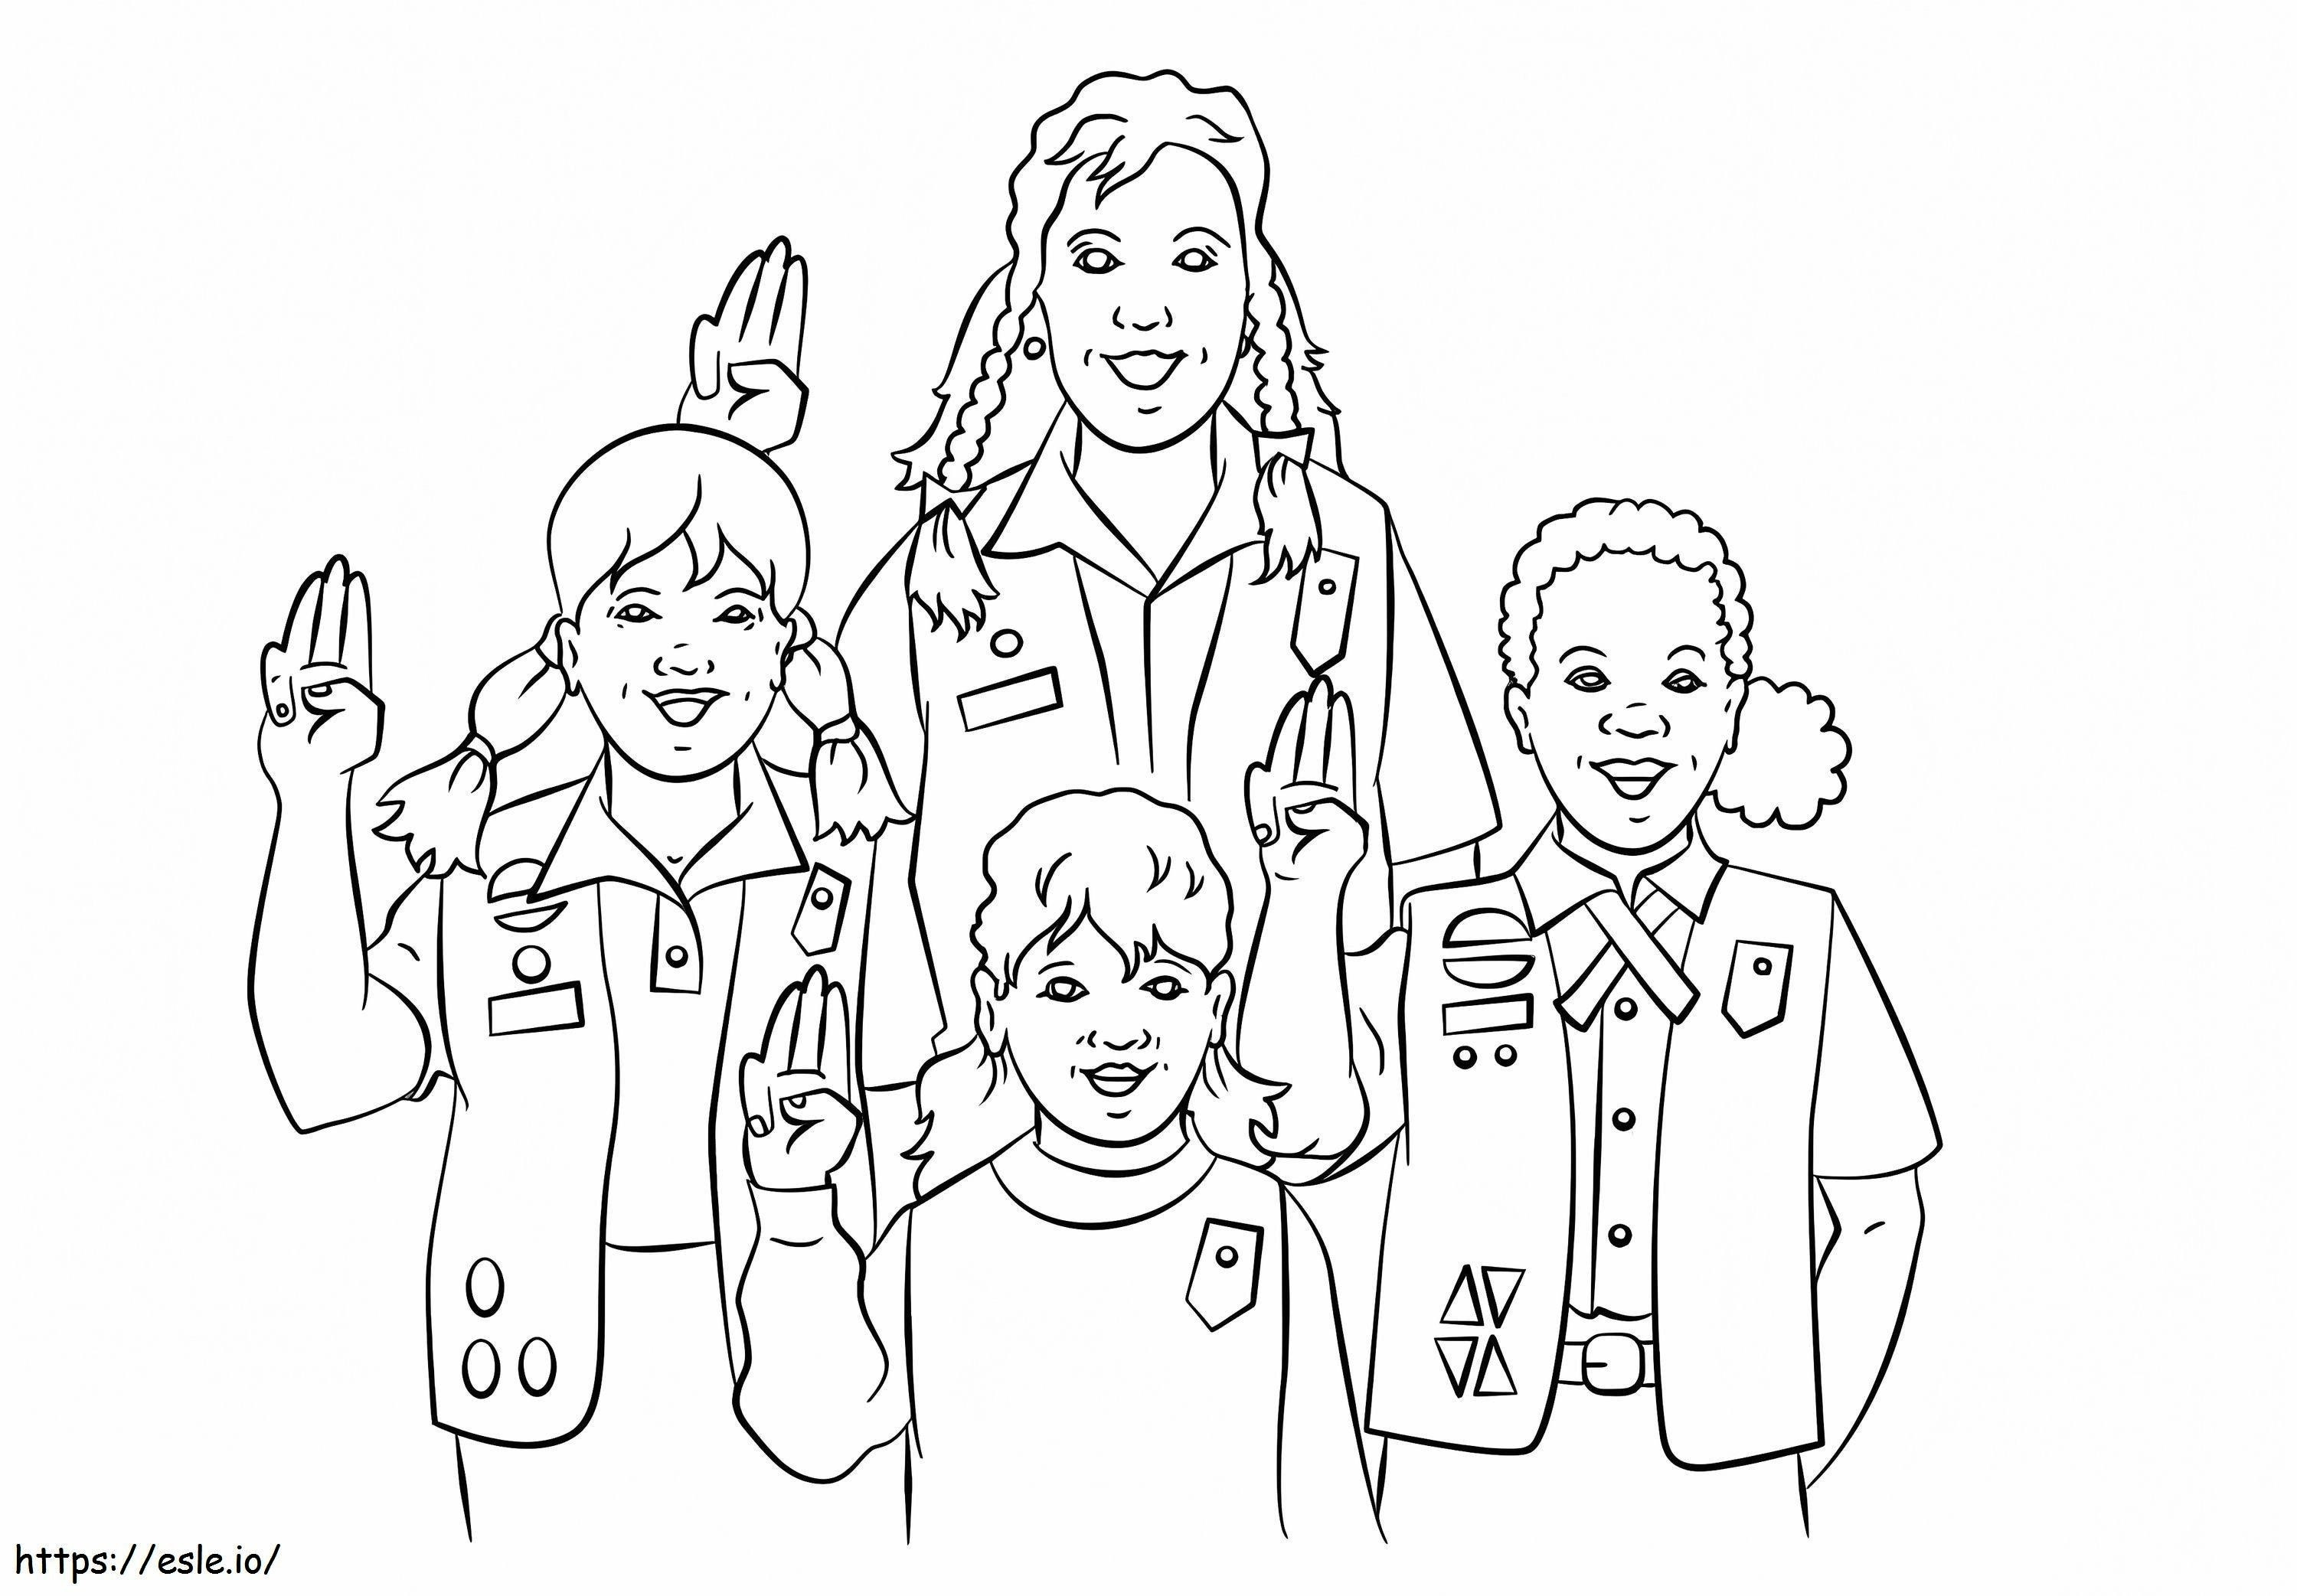 Girl Scouts Pledge coloring page